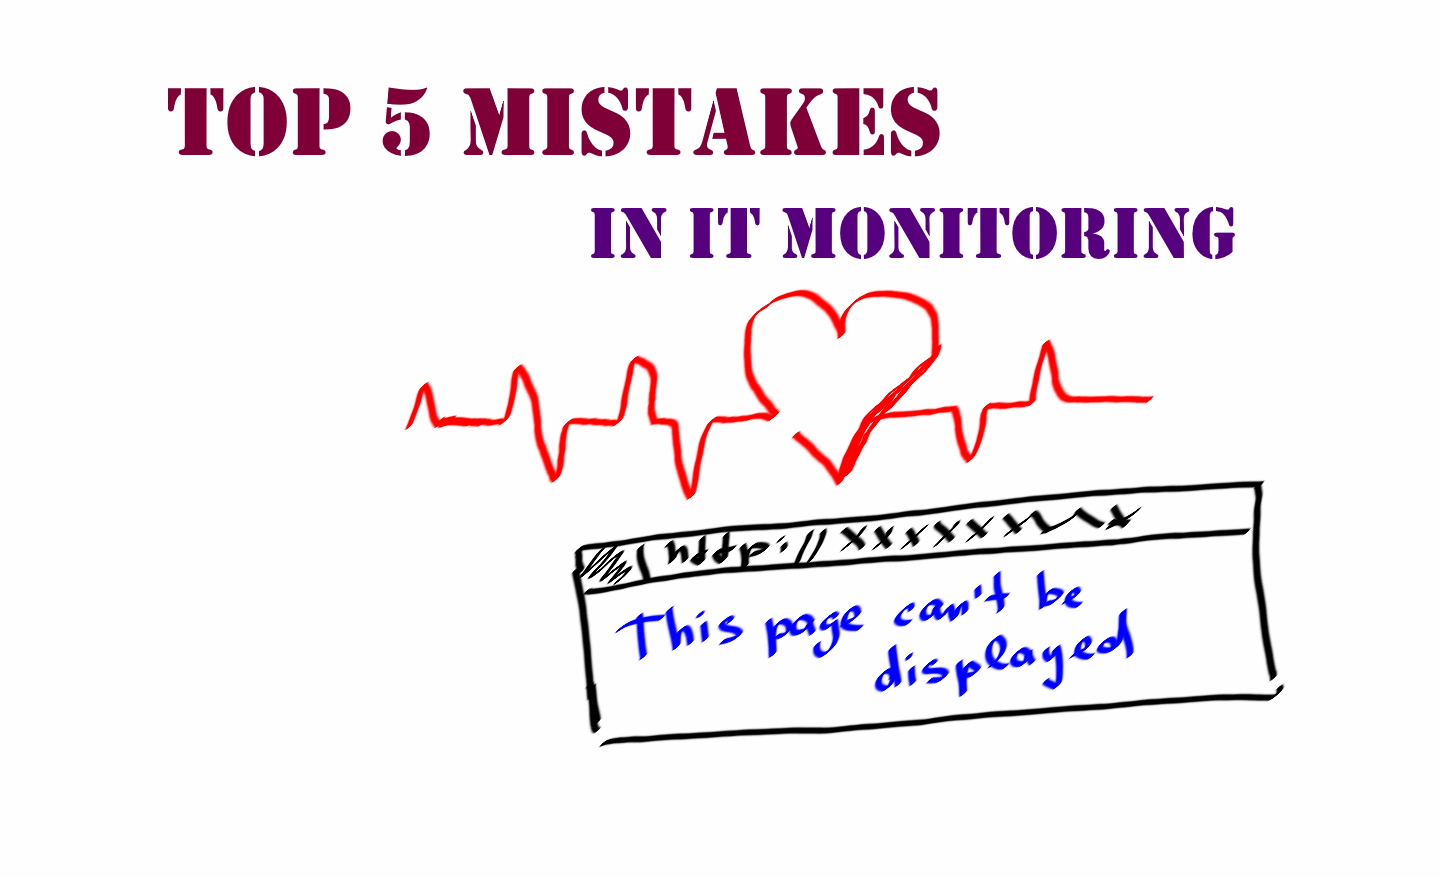 Top 5 mistakes in IT monitoring